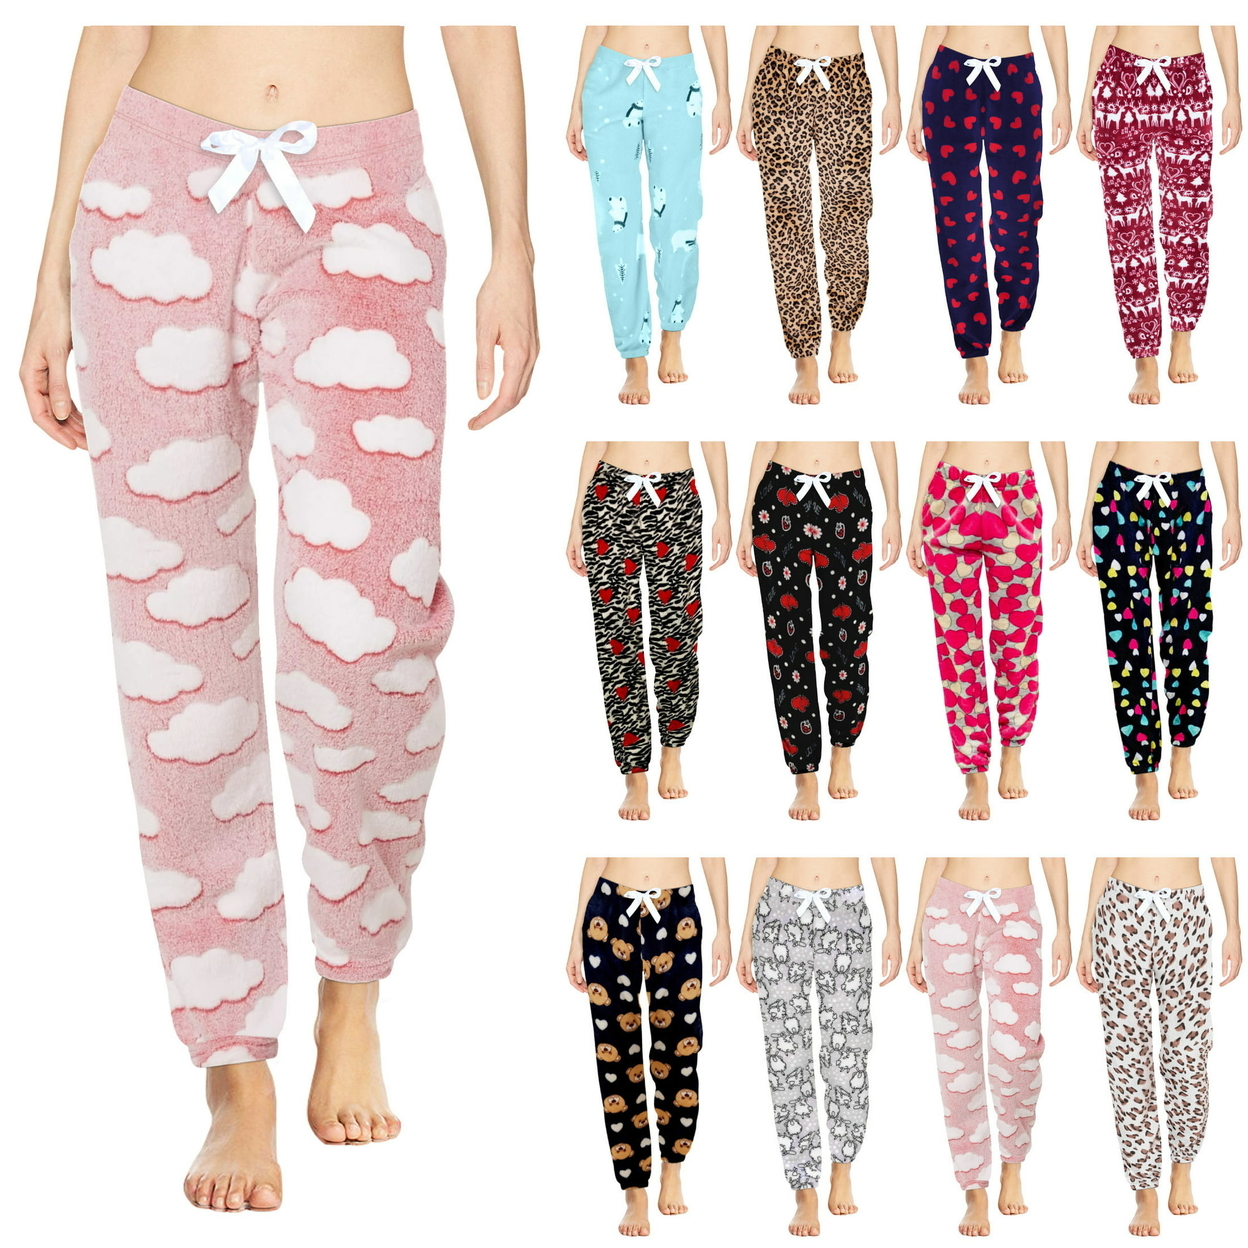 4-Pack: Women's Solid & Printed Ultra-Soft Comfy Stretch Micro-Fleece Pajama Lounge Pants - X-large, Love